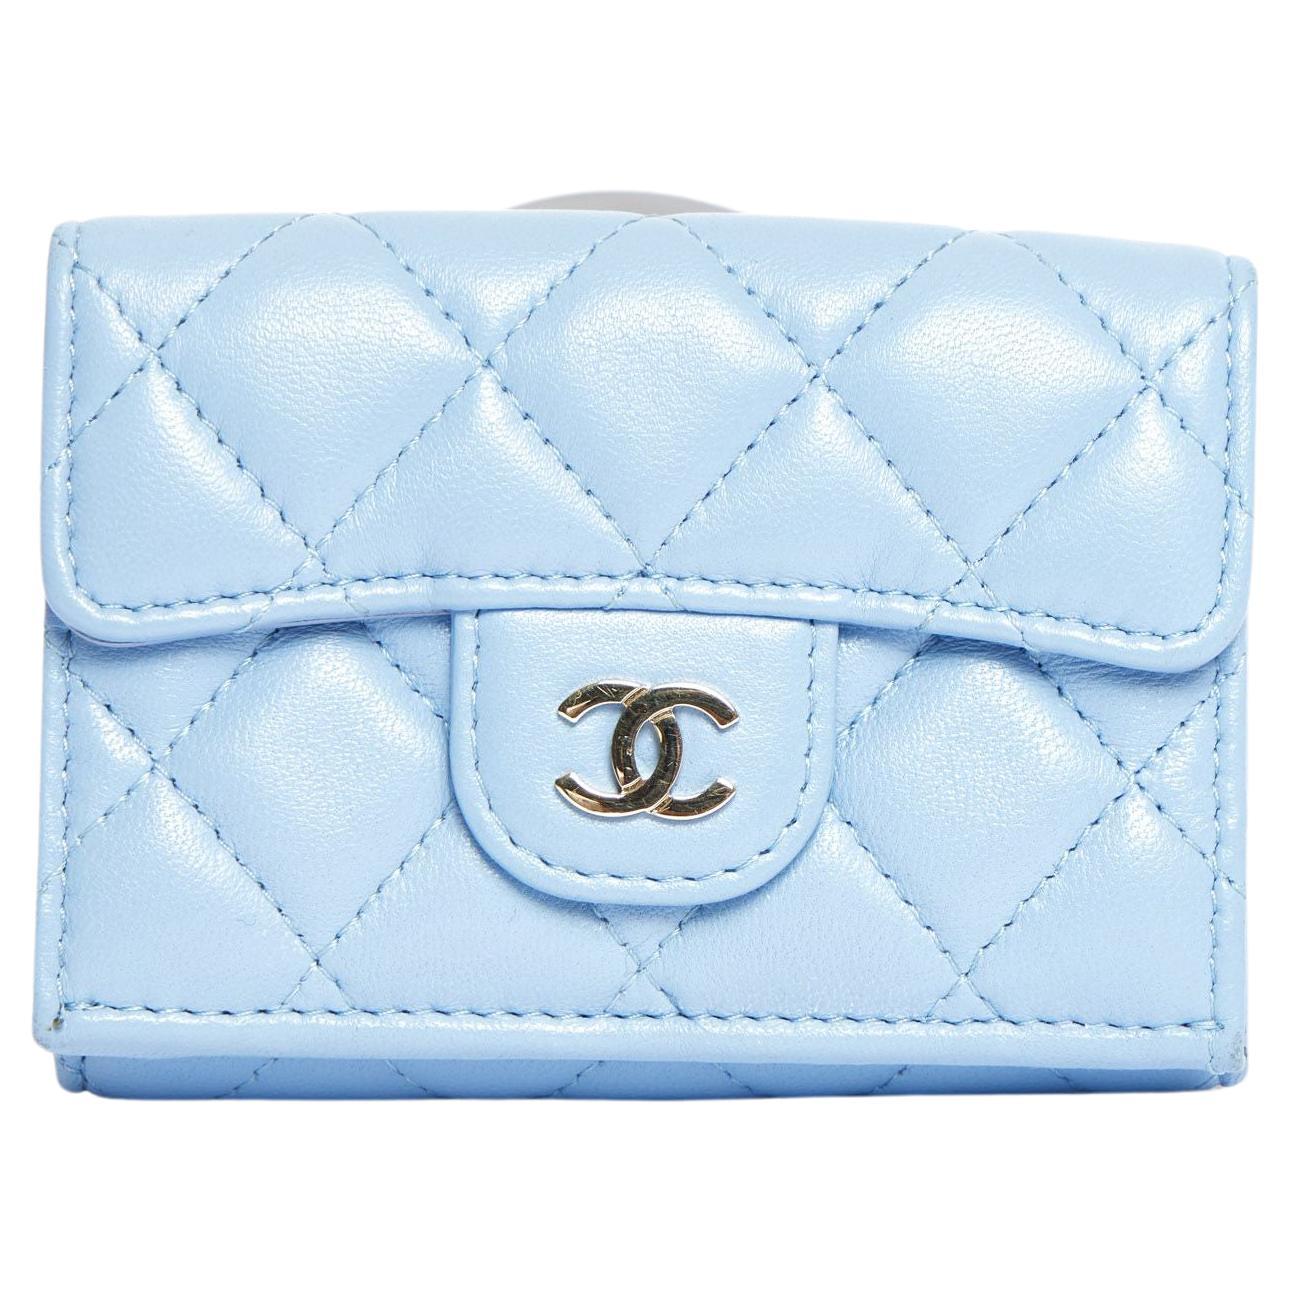 Chanel Diaper Bags - 2 For Sale on 1stDibs  chanel mommy bag, chanel  deauville diaper bag, chanel.diaper bag